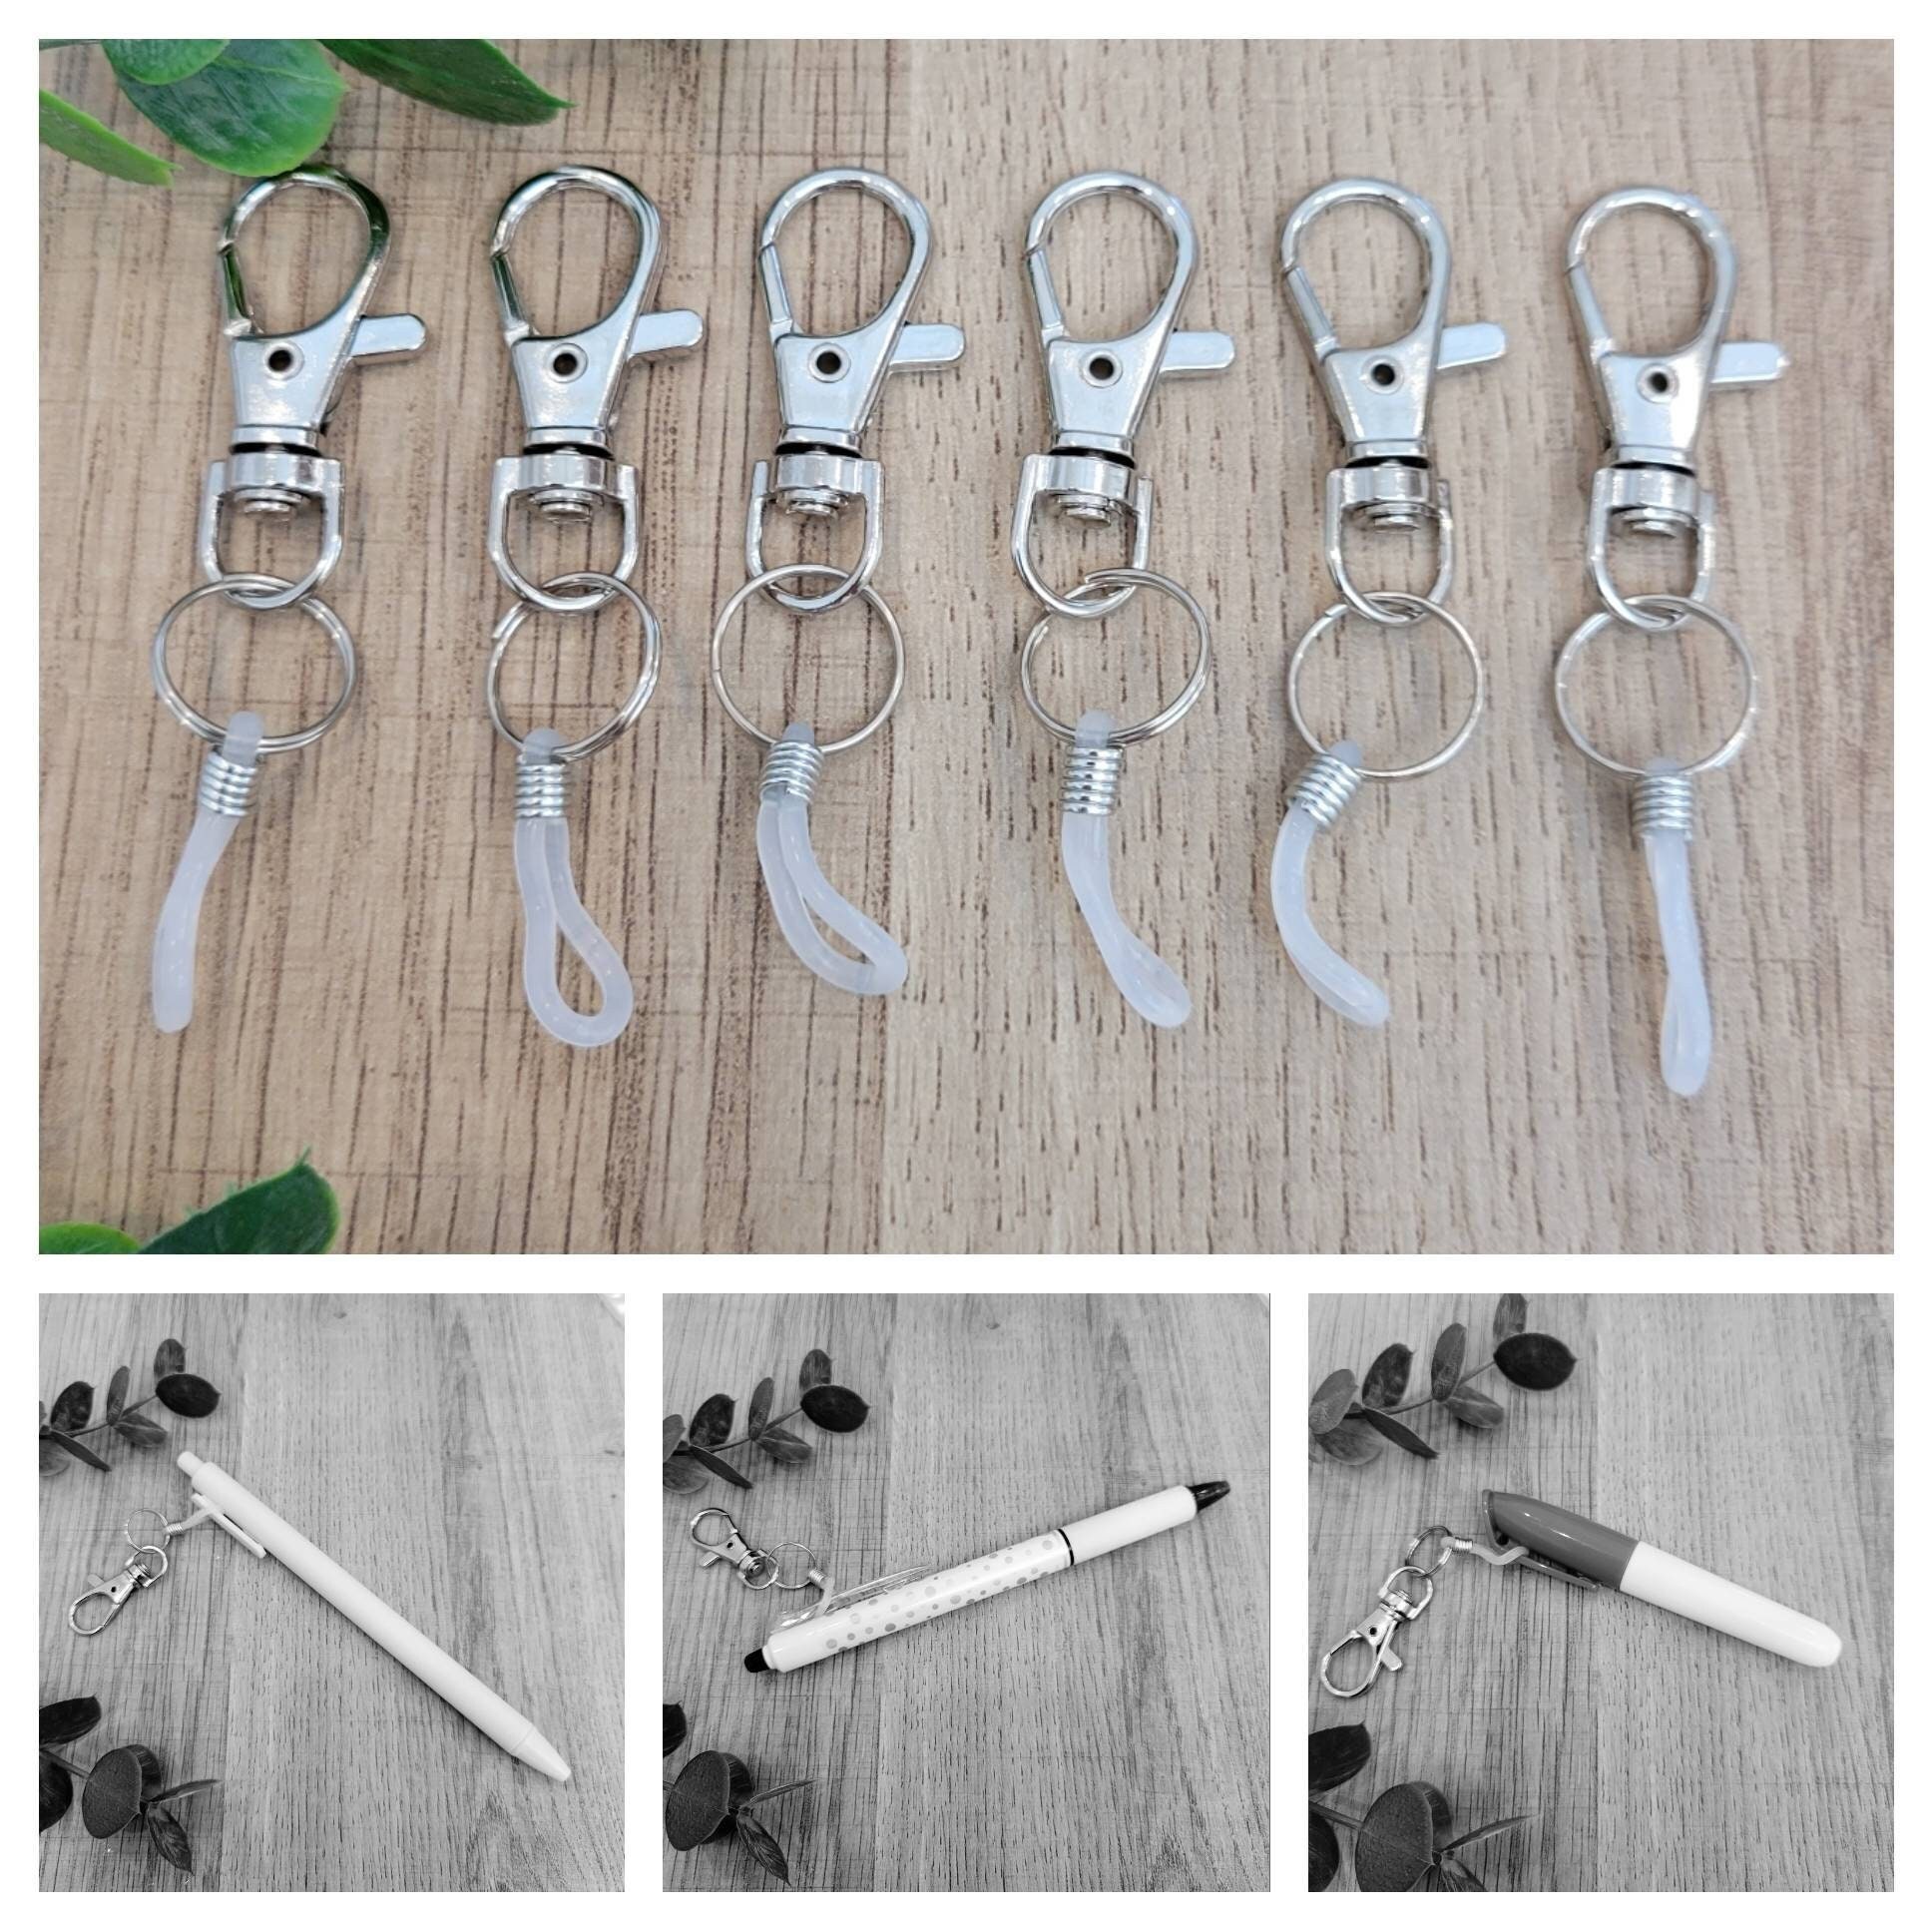 Shuttle Pen with Carabiner Clip - 6 Colors to Pick From - Mini 4-in-1